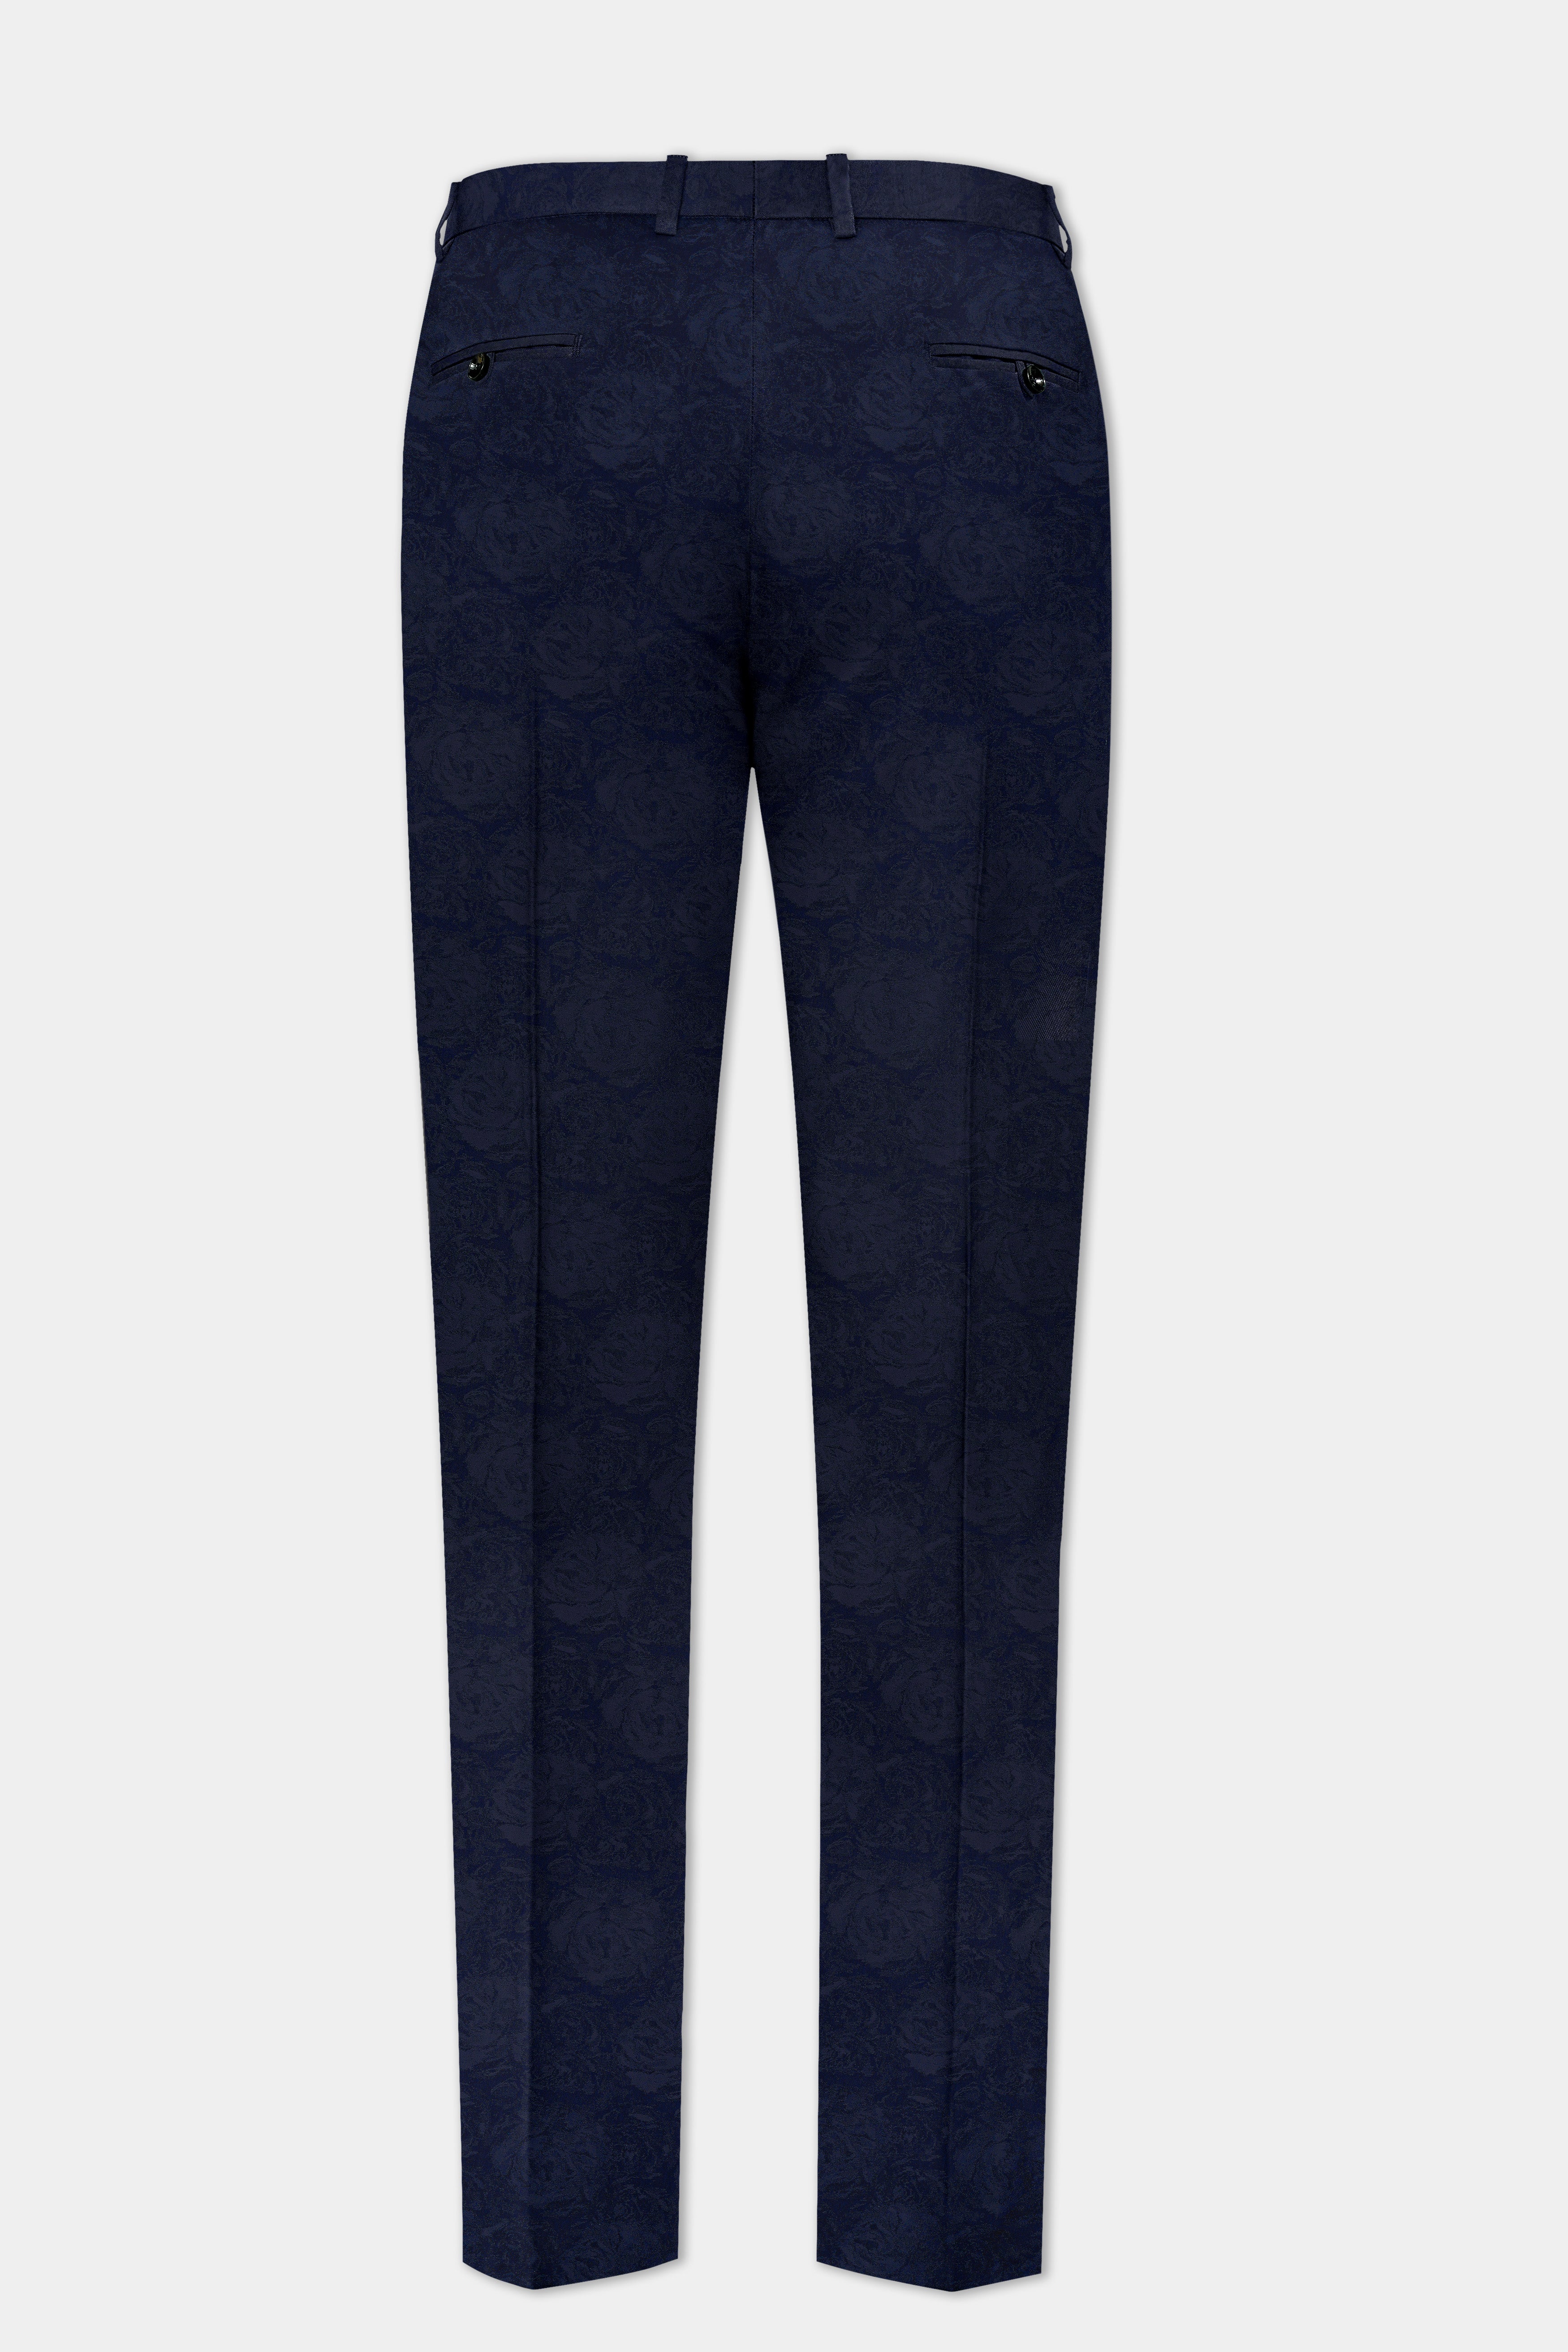 Firefly Blue Jacquard Textured Single Breasted Suit